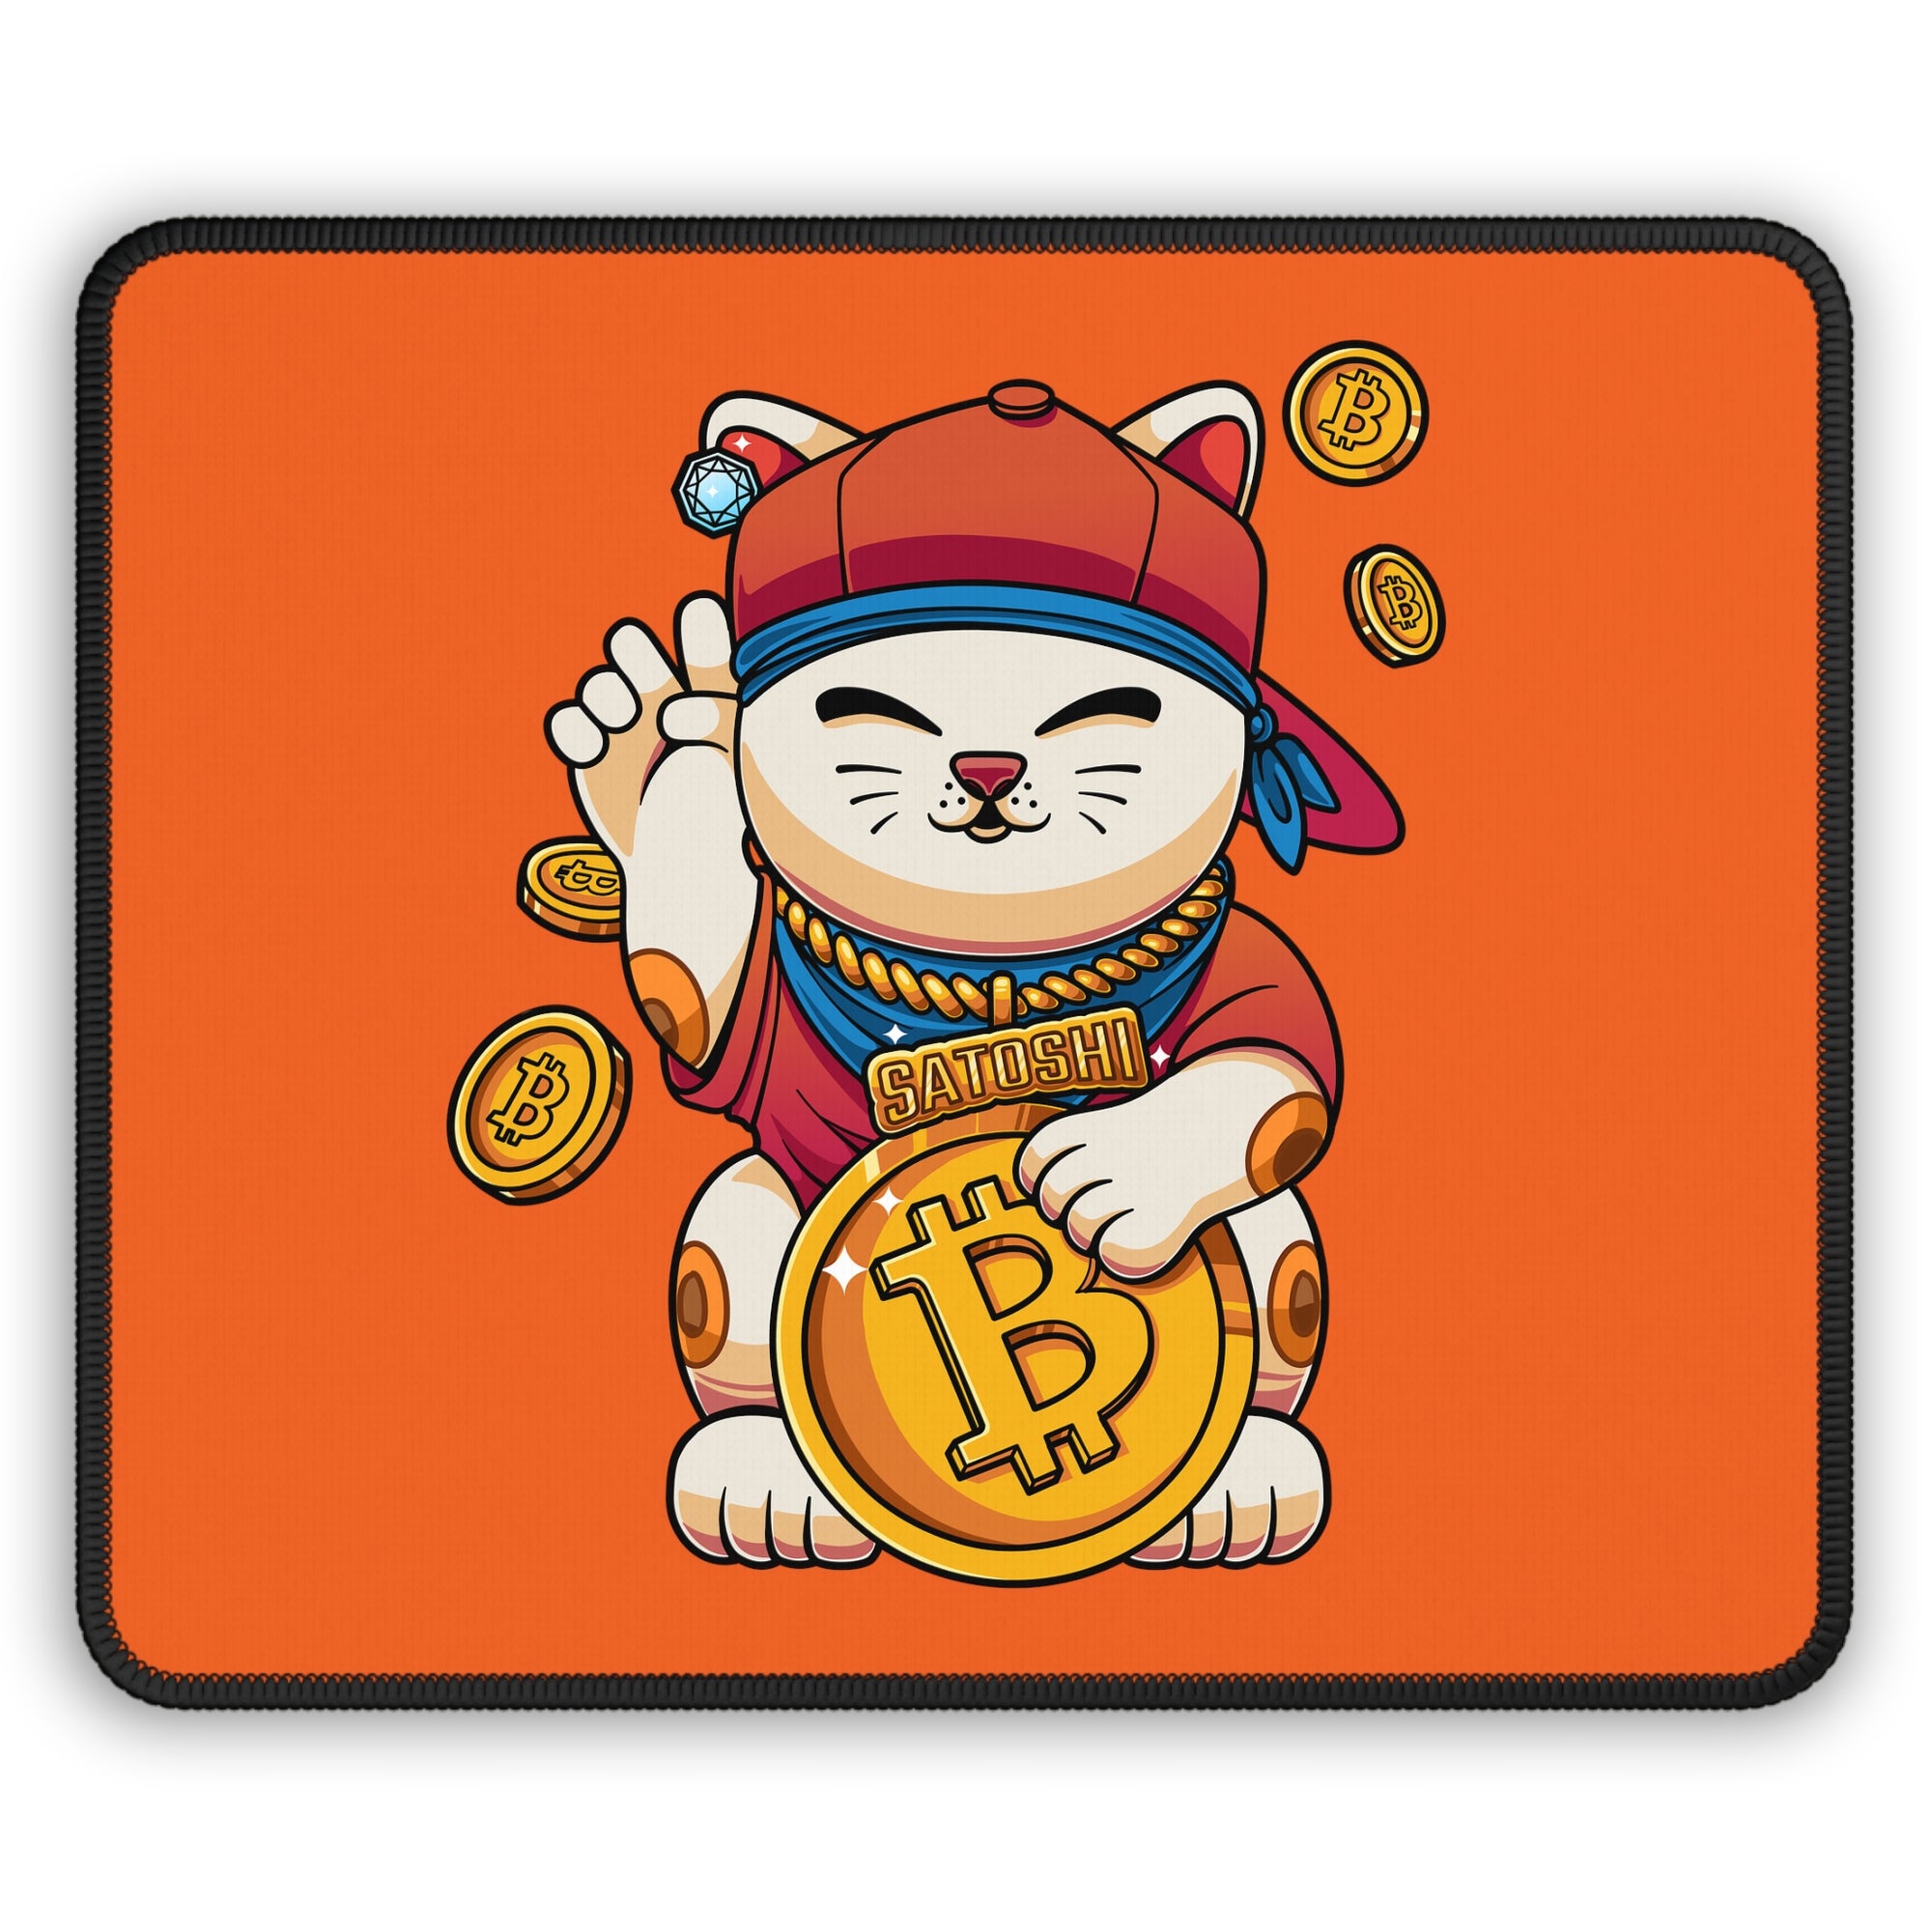 Bitcoin Desk Accessory: Satoshi Lucky Cat Mouse Pad. Available at NEONCRYPTO STORE.